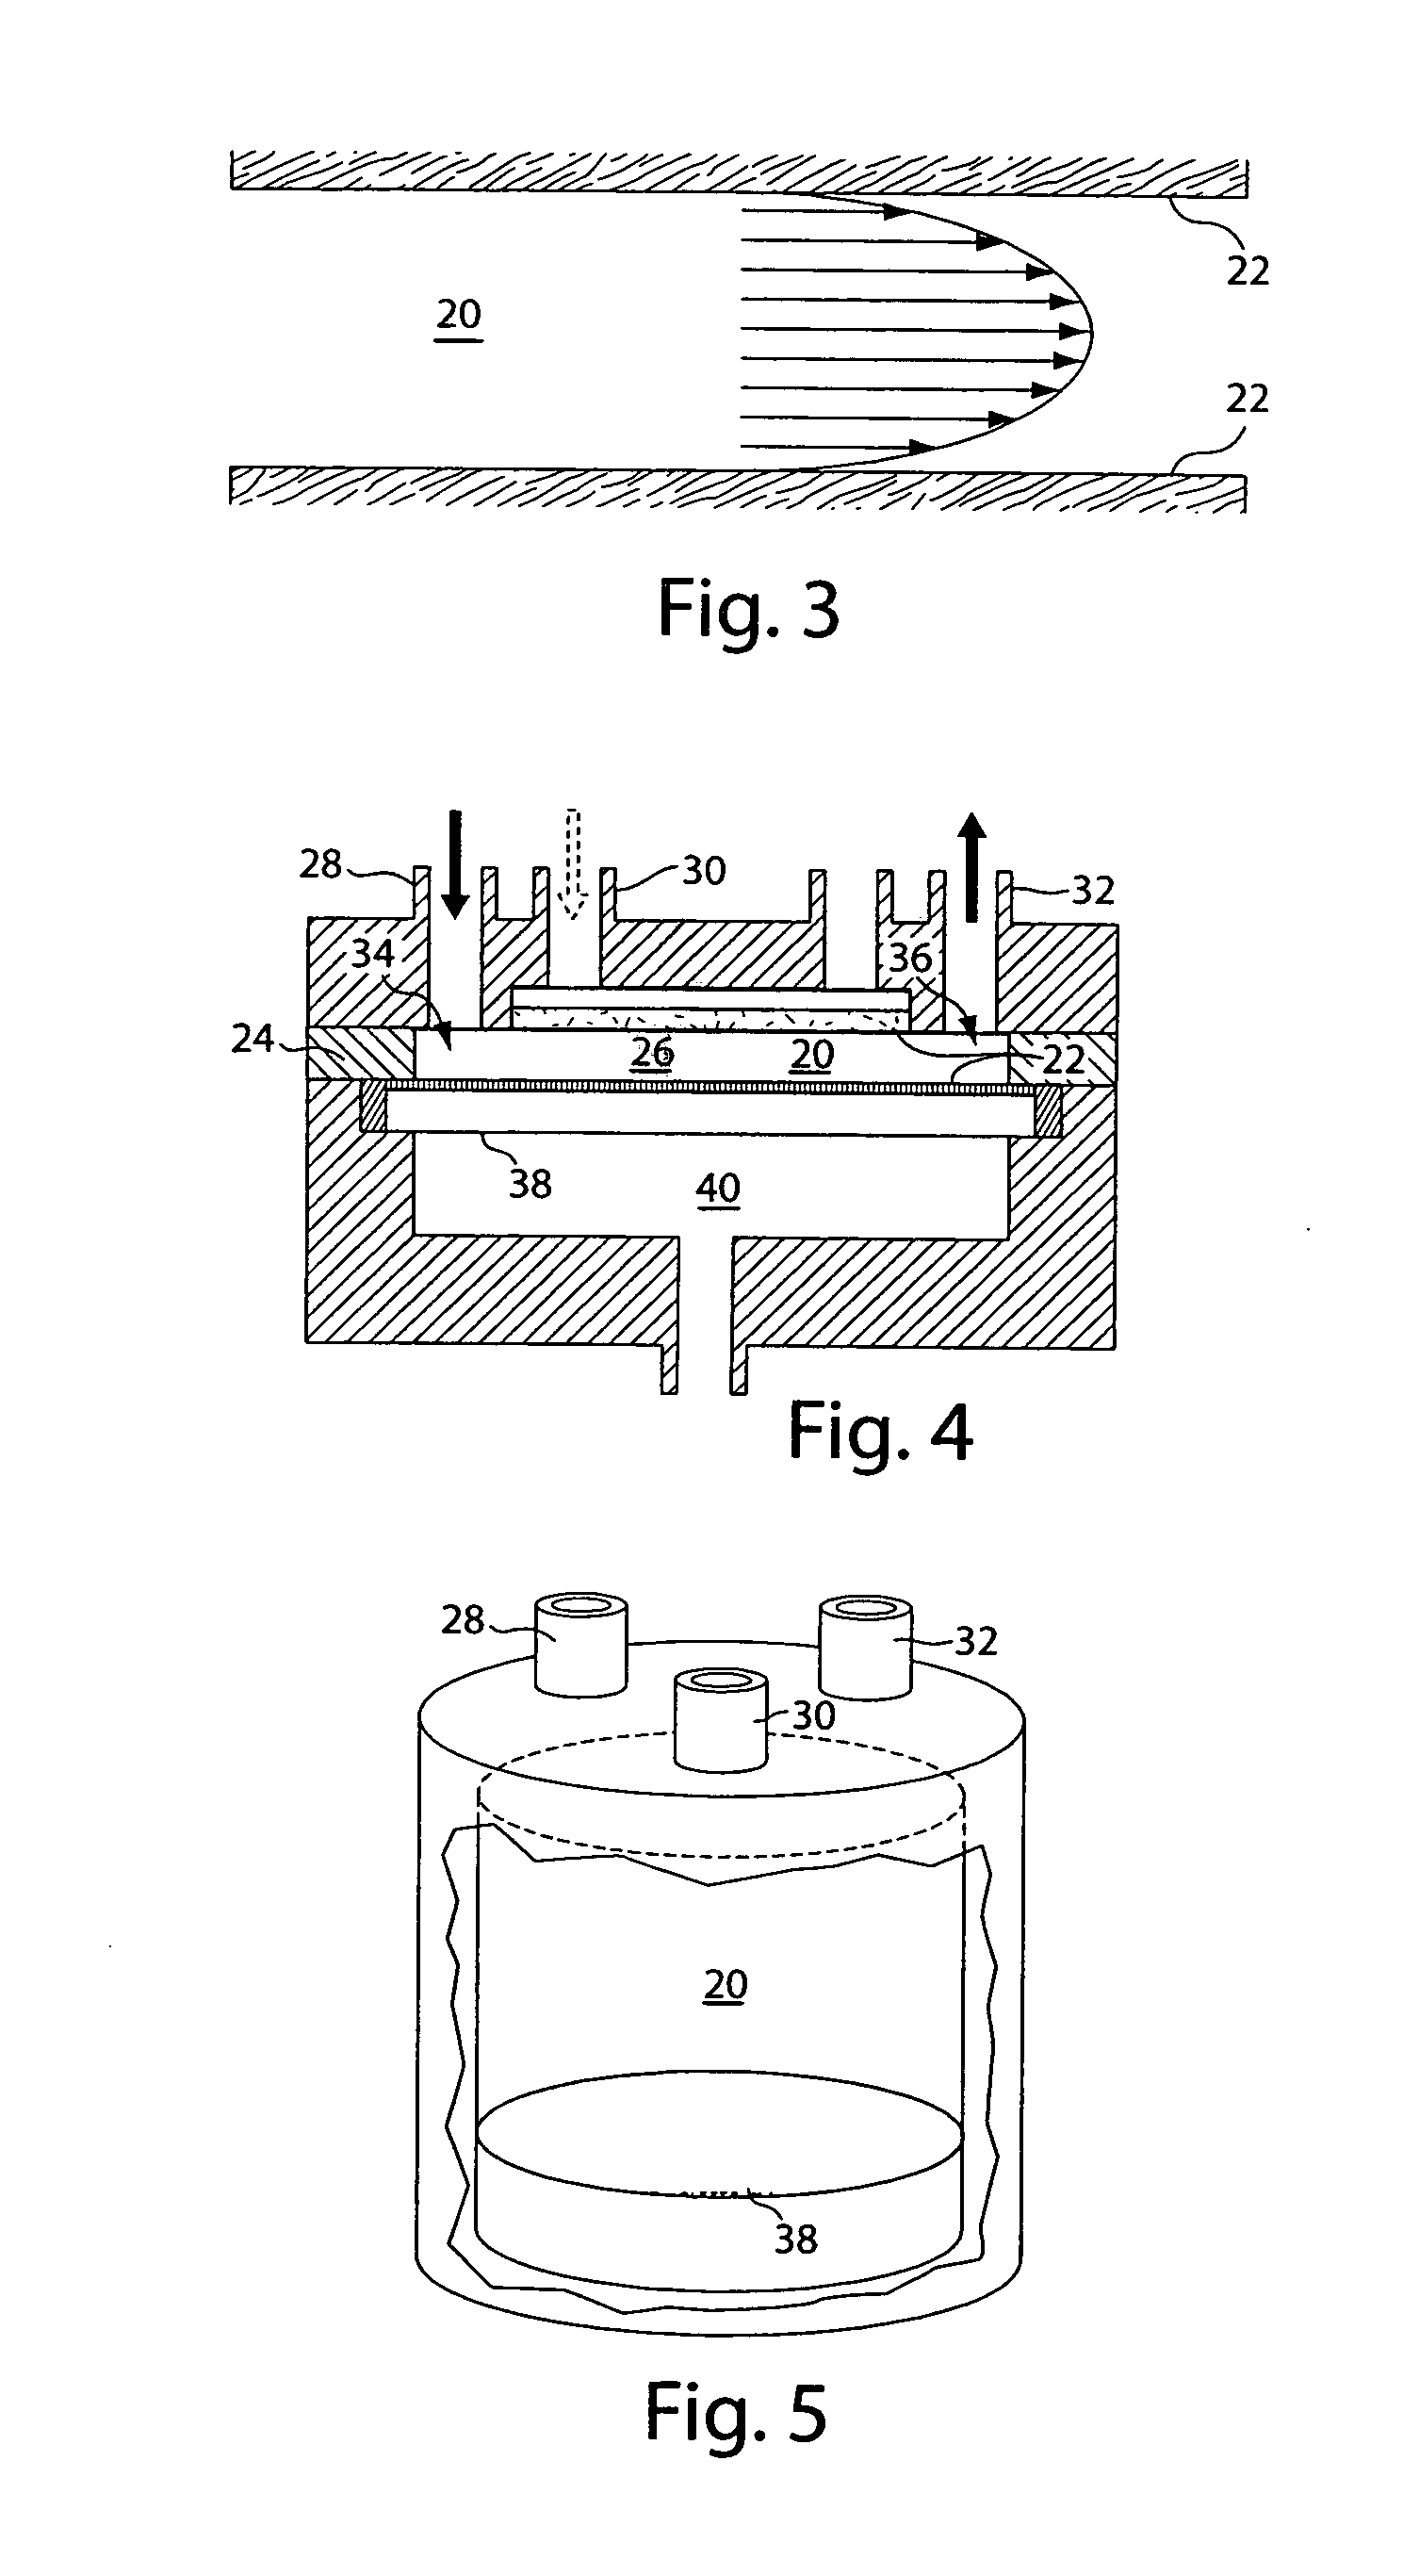 Systems and methods for sample modification using fluidic chambers